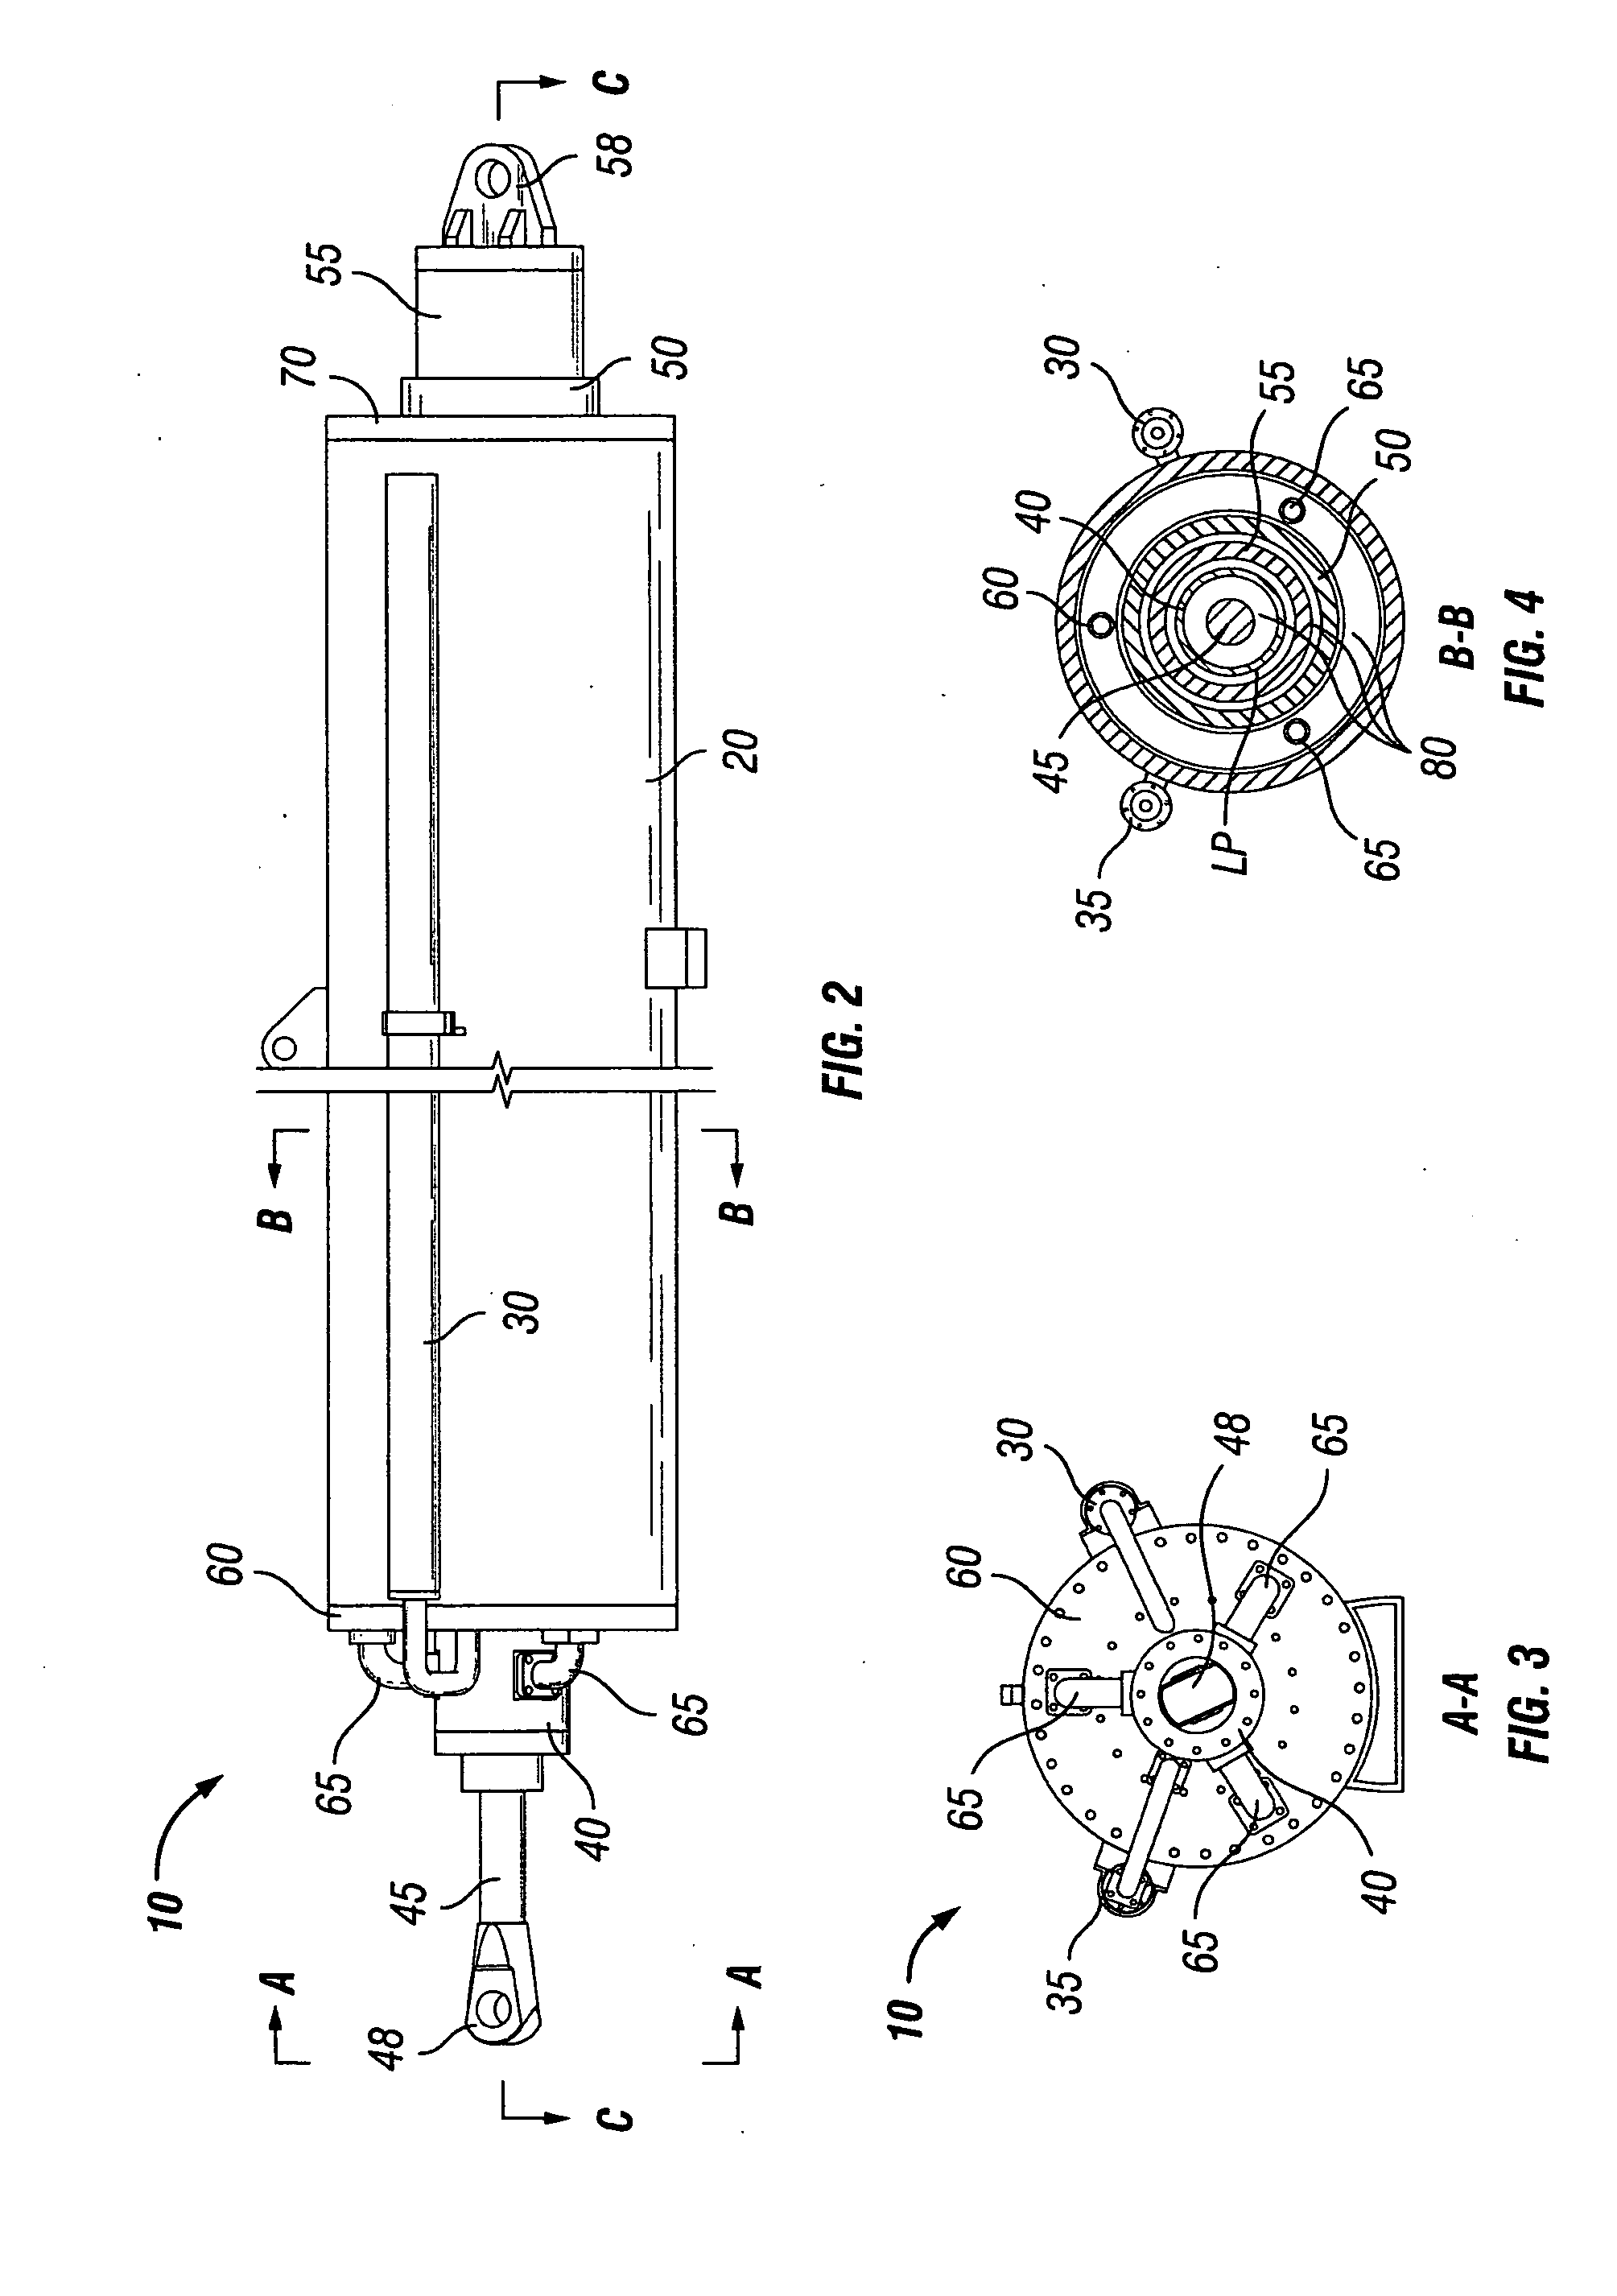 Inline compensator for a floating drill rig